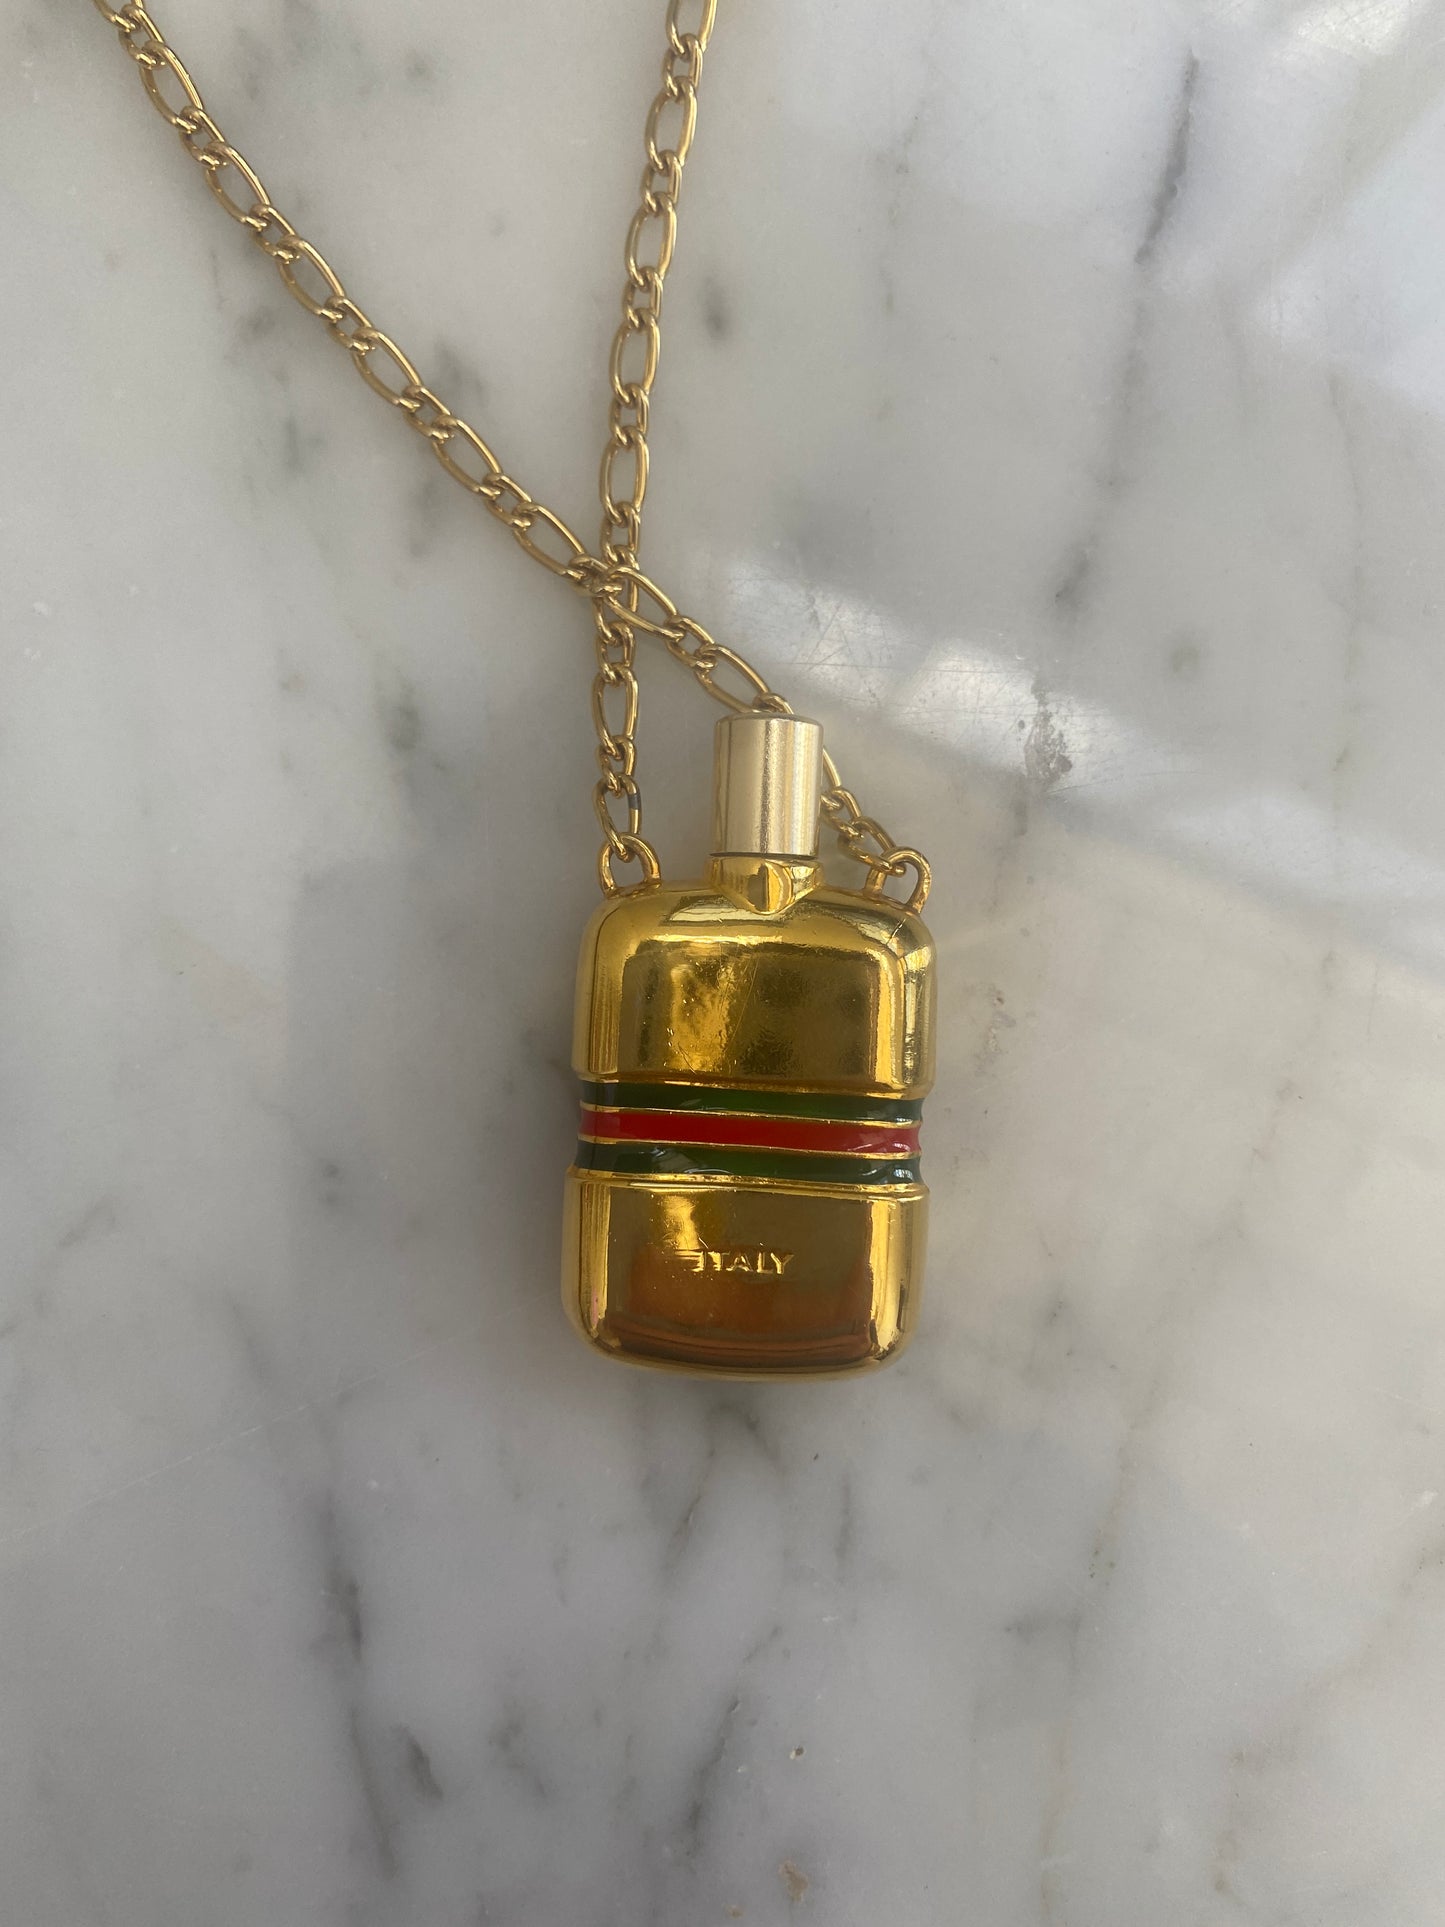 Gucci - Gold Bottle Chain Necklace